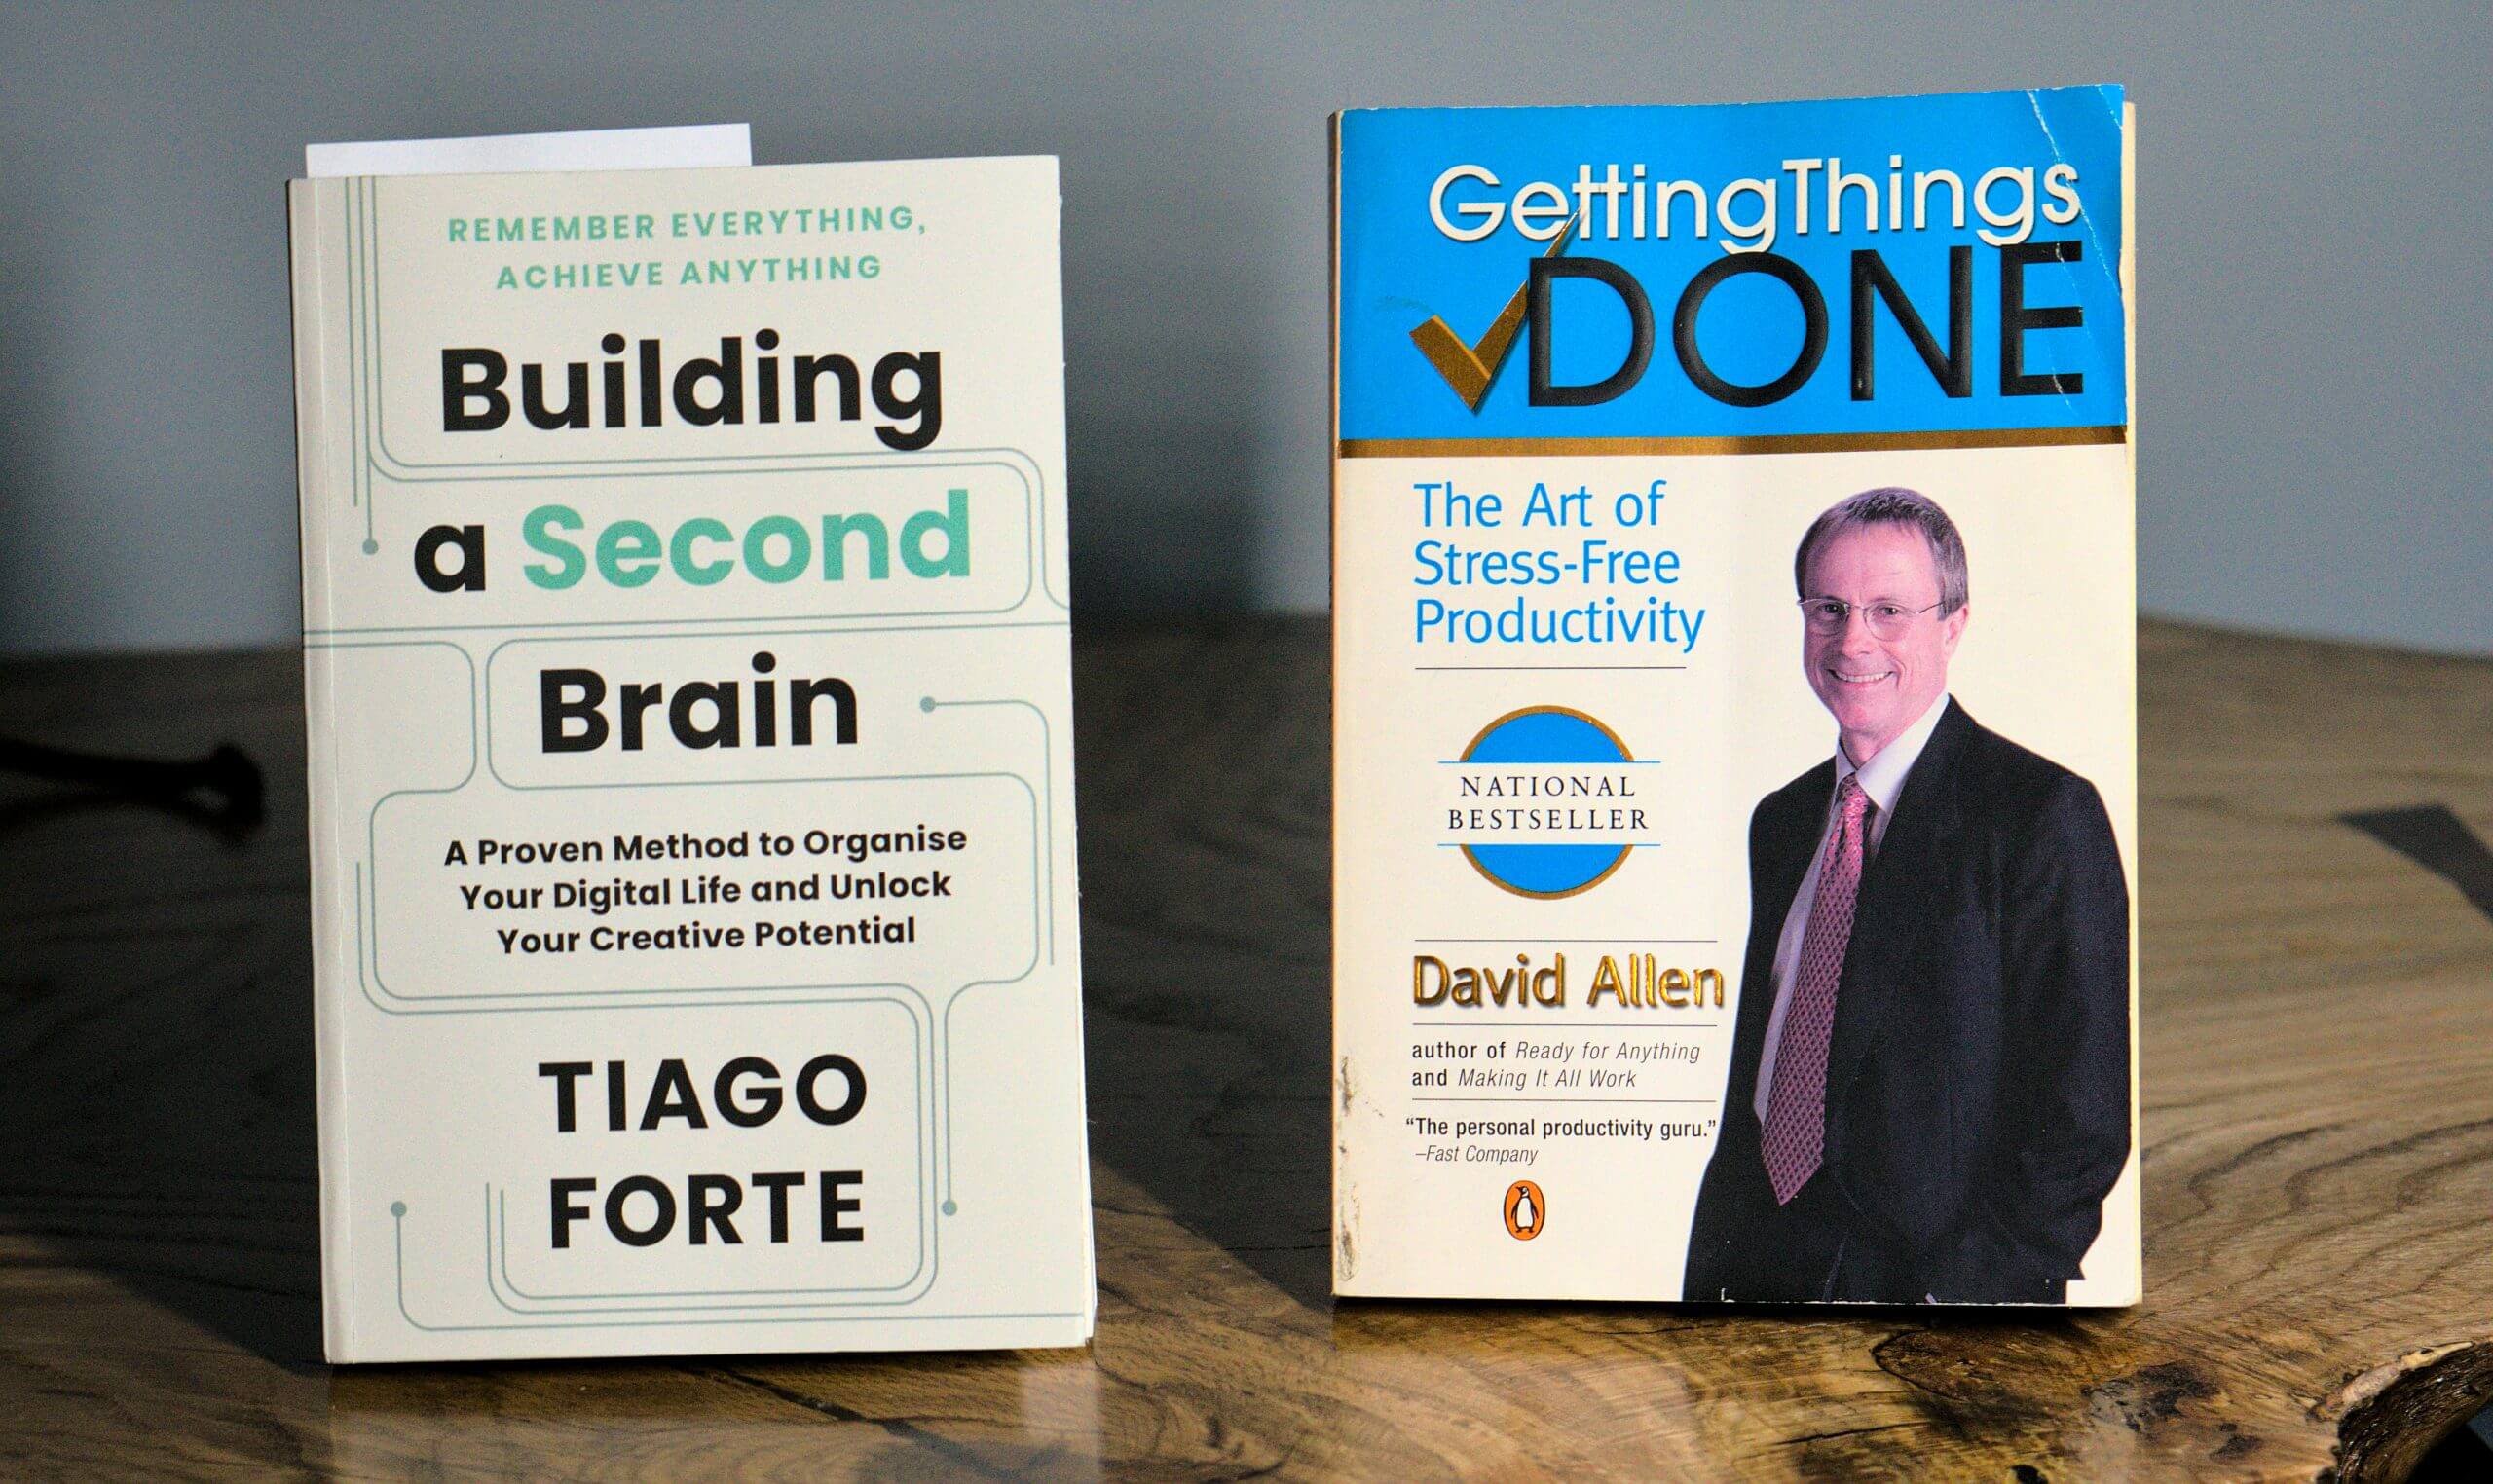 Building a Second Brain and GTD